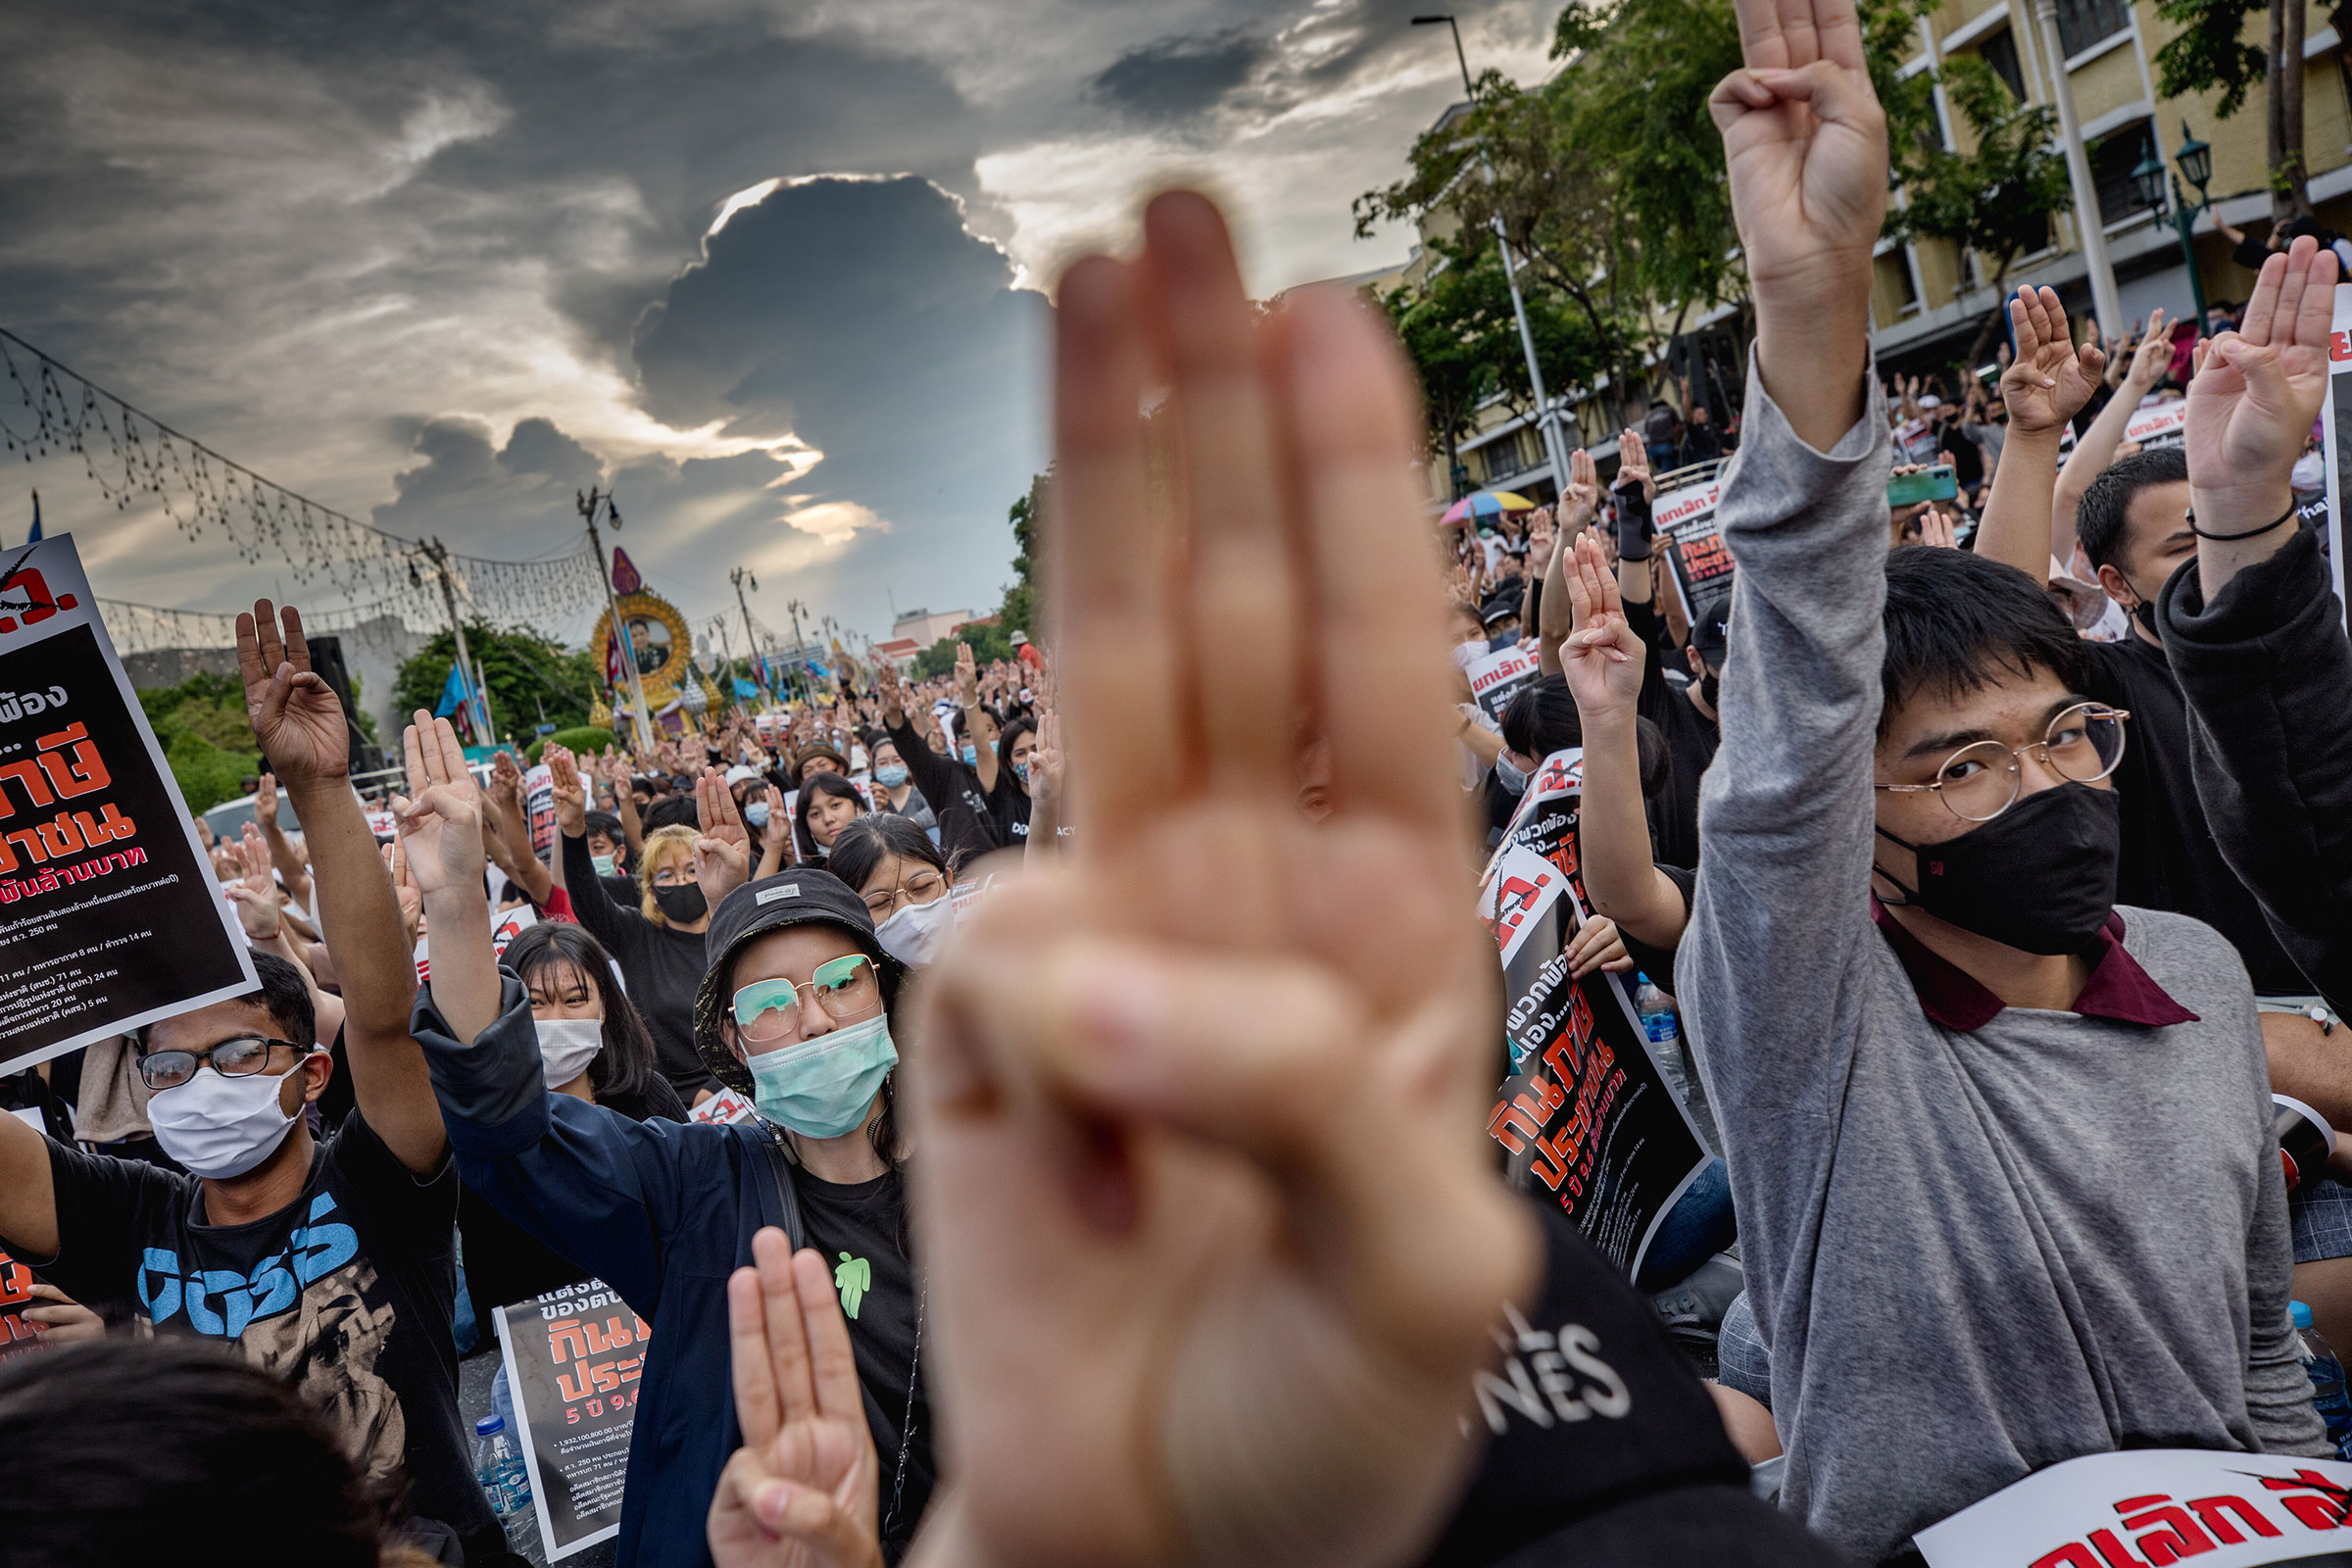 Protesters perform a 'Hunger Games' three finger salute during anti-government demonstration in Bangkok on Aug. 16, 2020. (Jonas Gratzer—LightRocket/Getty Images)